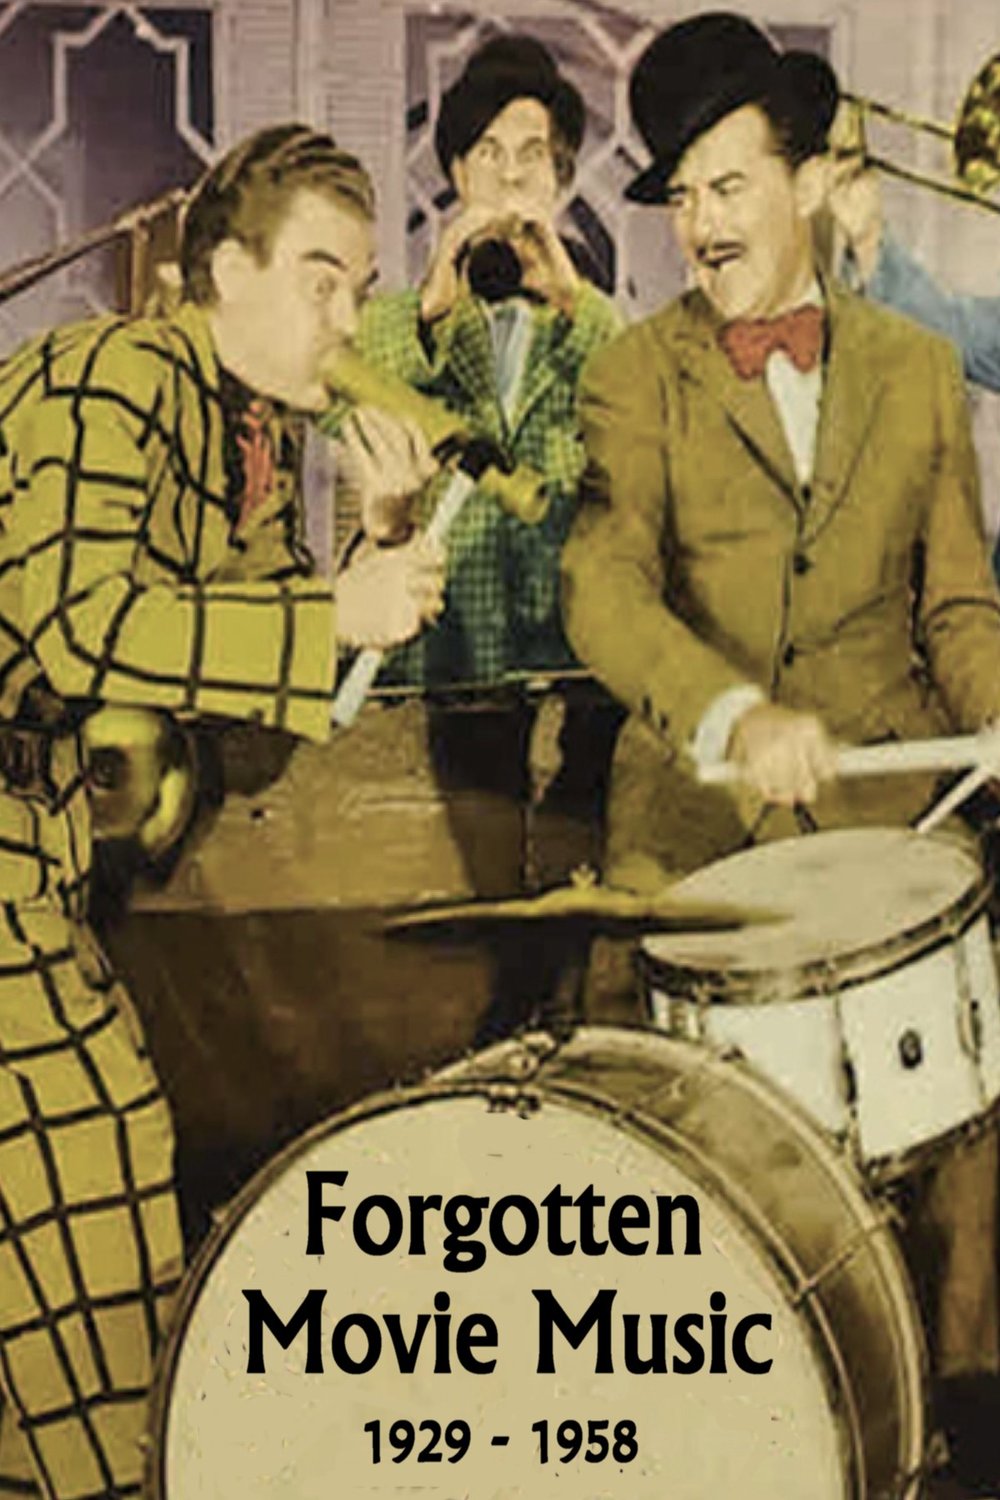 Poster of the movie Forgotten Movie Music, 1929-1985